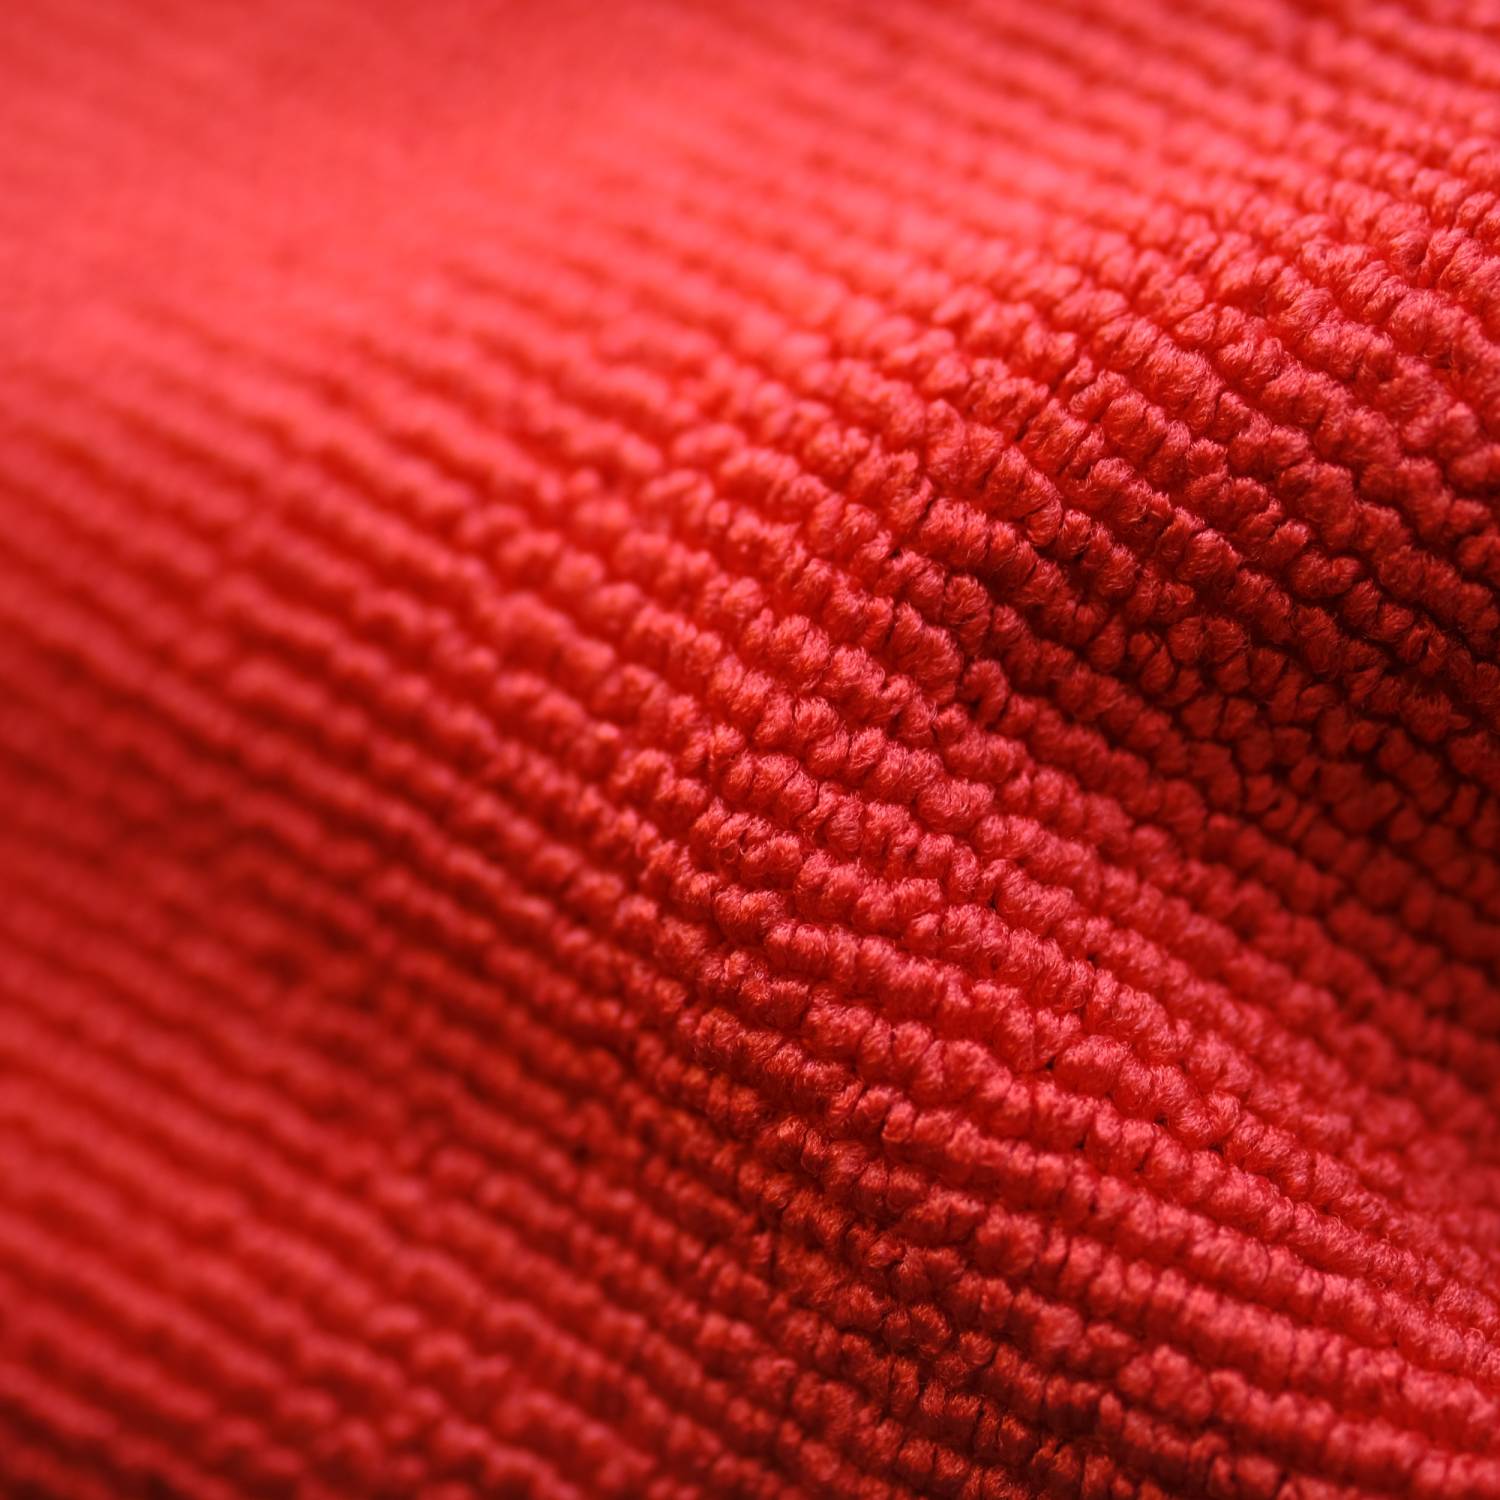 Up Close up image of Red Silver Nitrate Cloth 